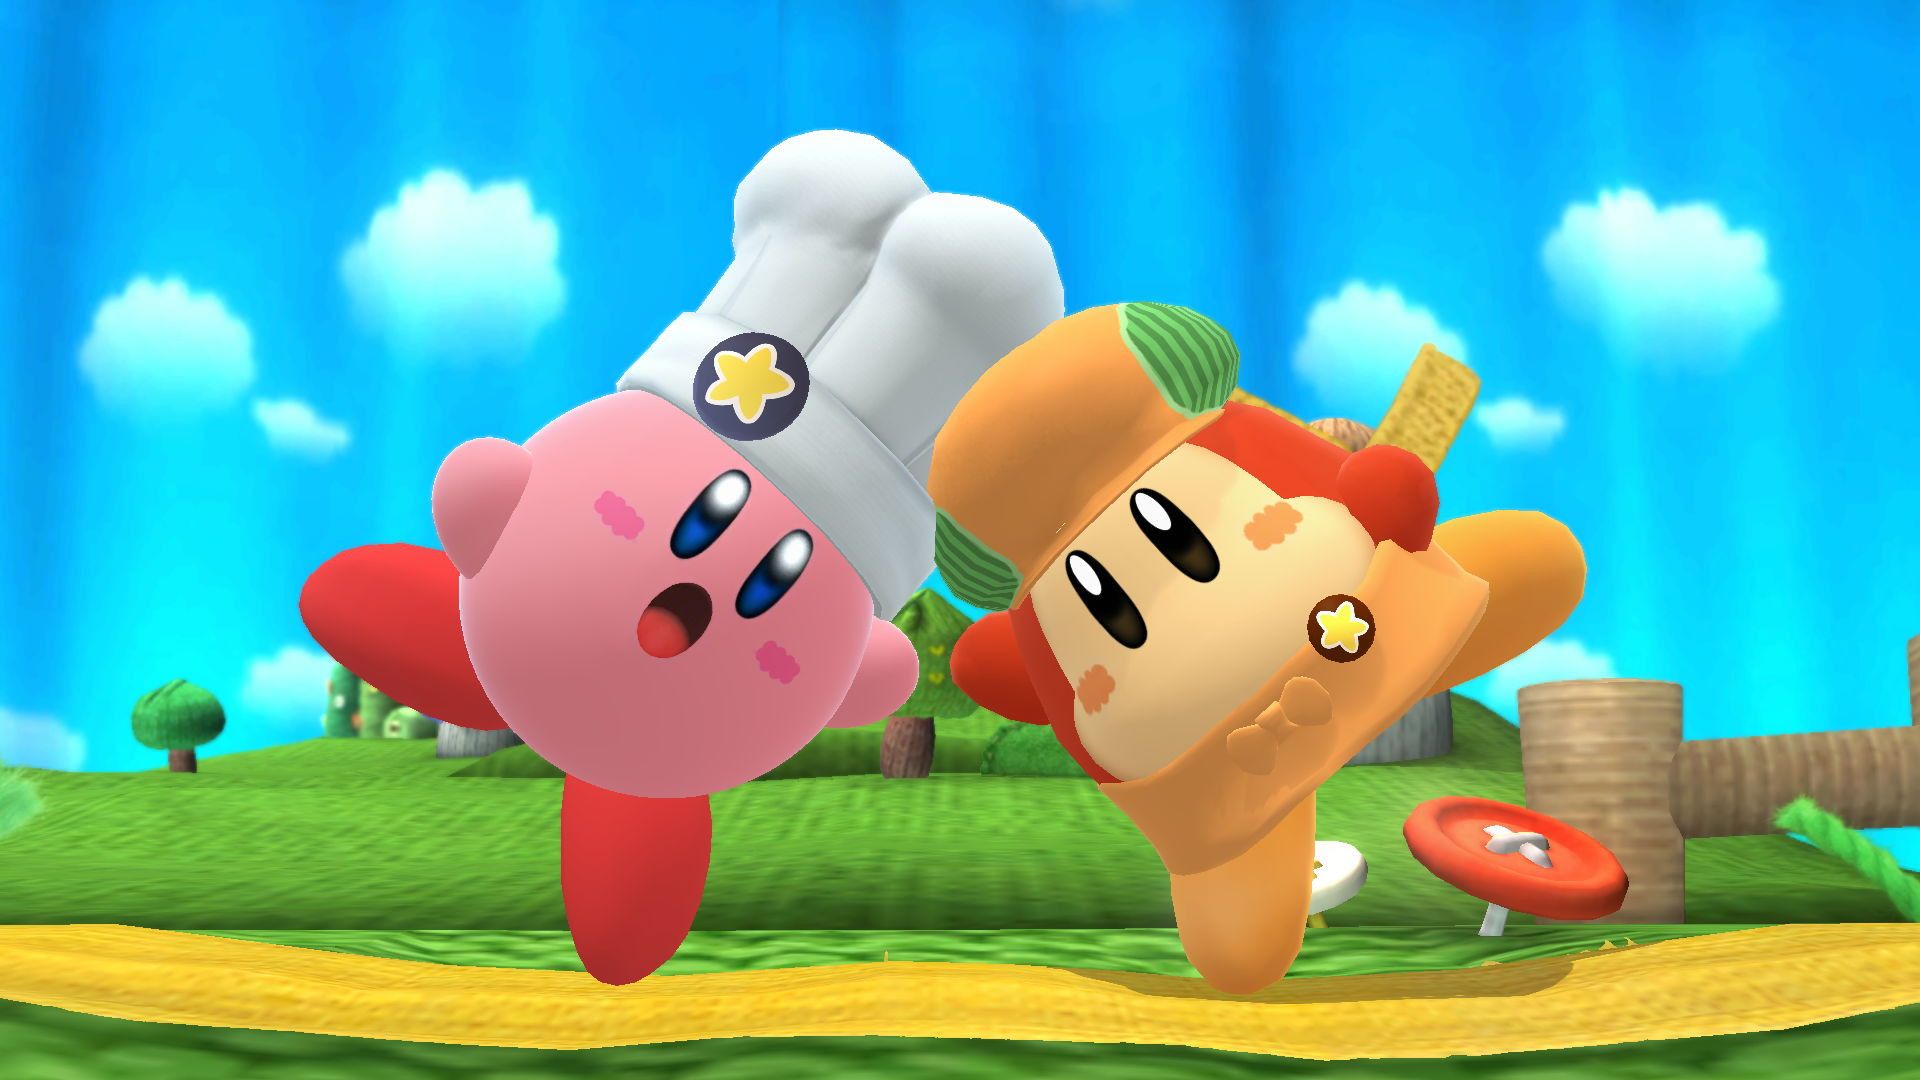 Kirby Cafe Skins (Kirby and Waddle Dee) [Super Smash Bros. (Wii U)] [Works In Progress]